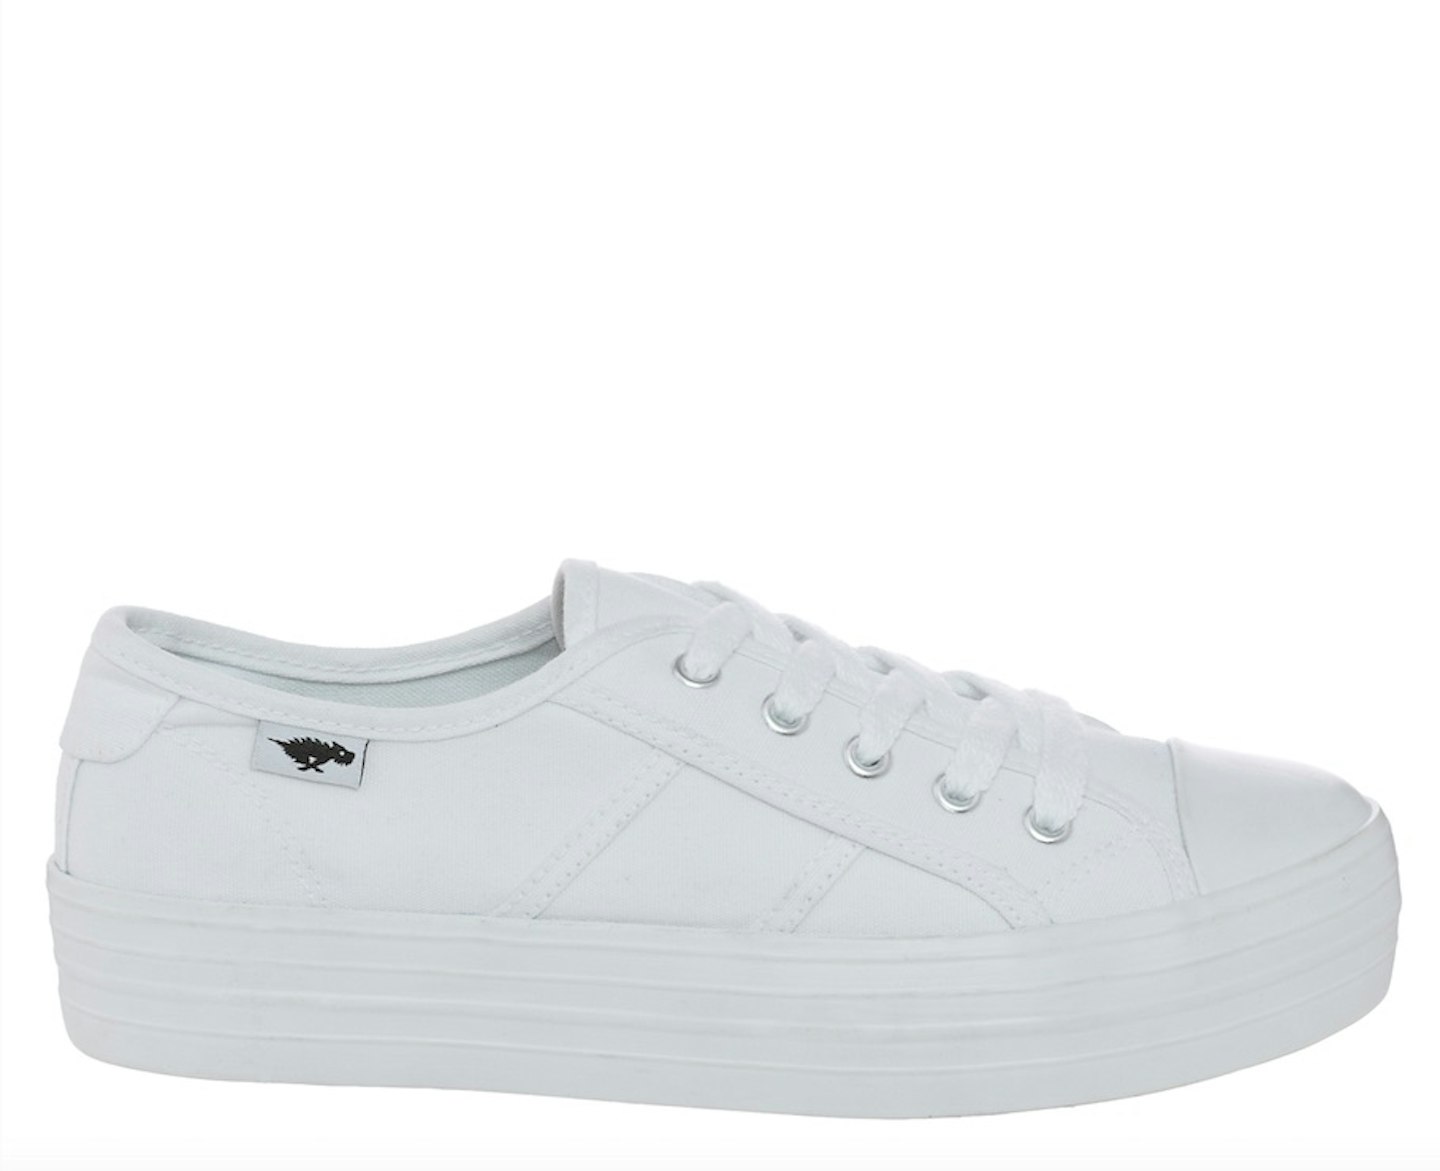 Rocket Dog have the perfect white trainer for summer